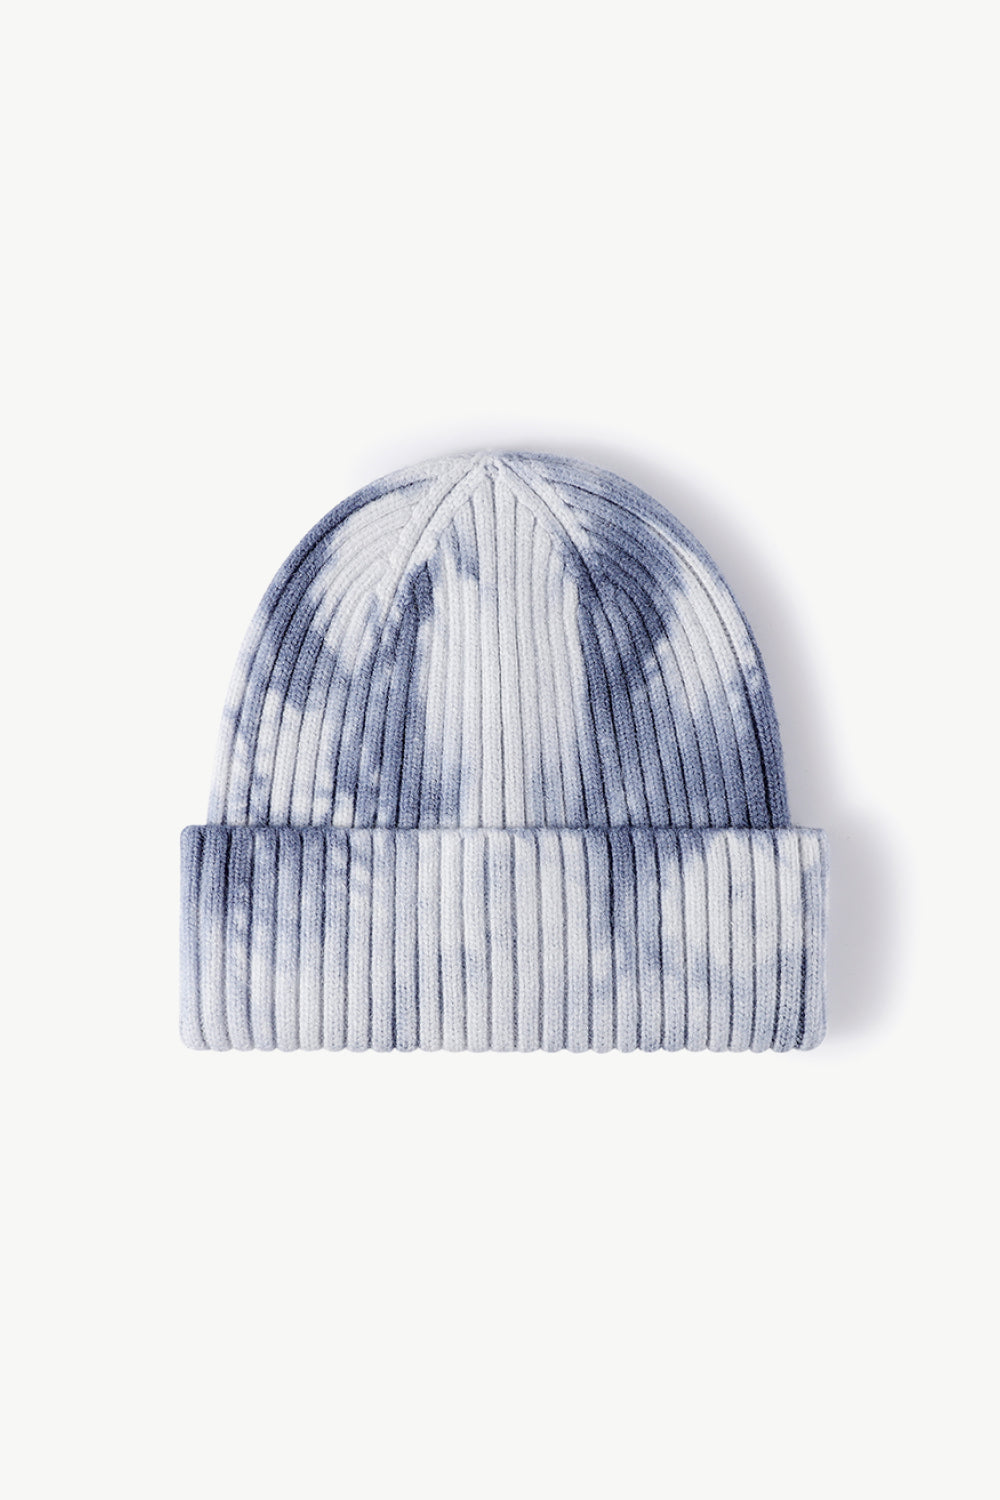 Blue Unisex Tie Dye Beanie Hat, Athletic Accessories and Fitness Accessory